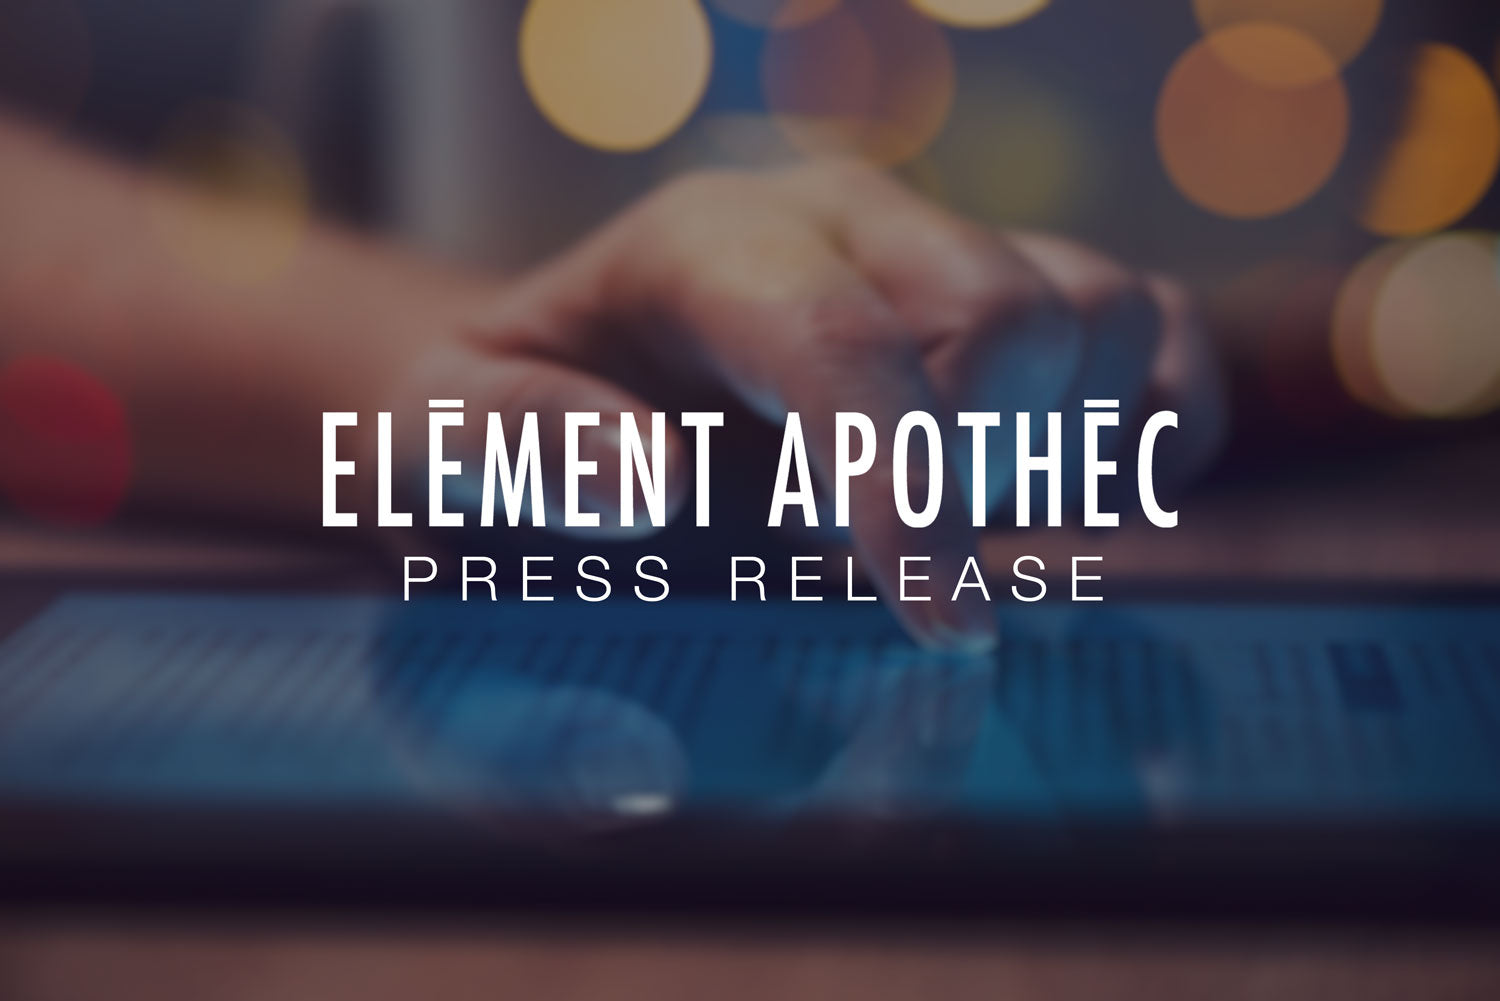 Press Release: Element Apothec Expands Wellness Product Lines to Meet Customer Demand